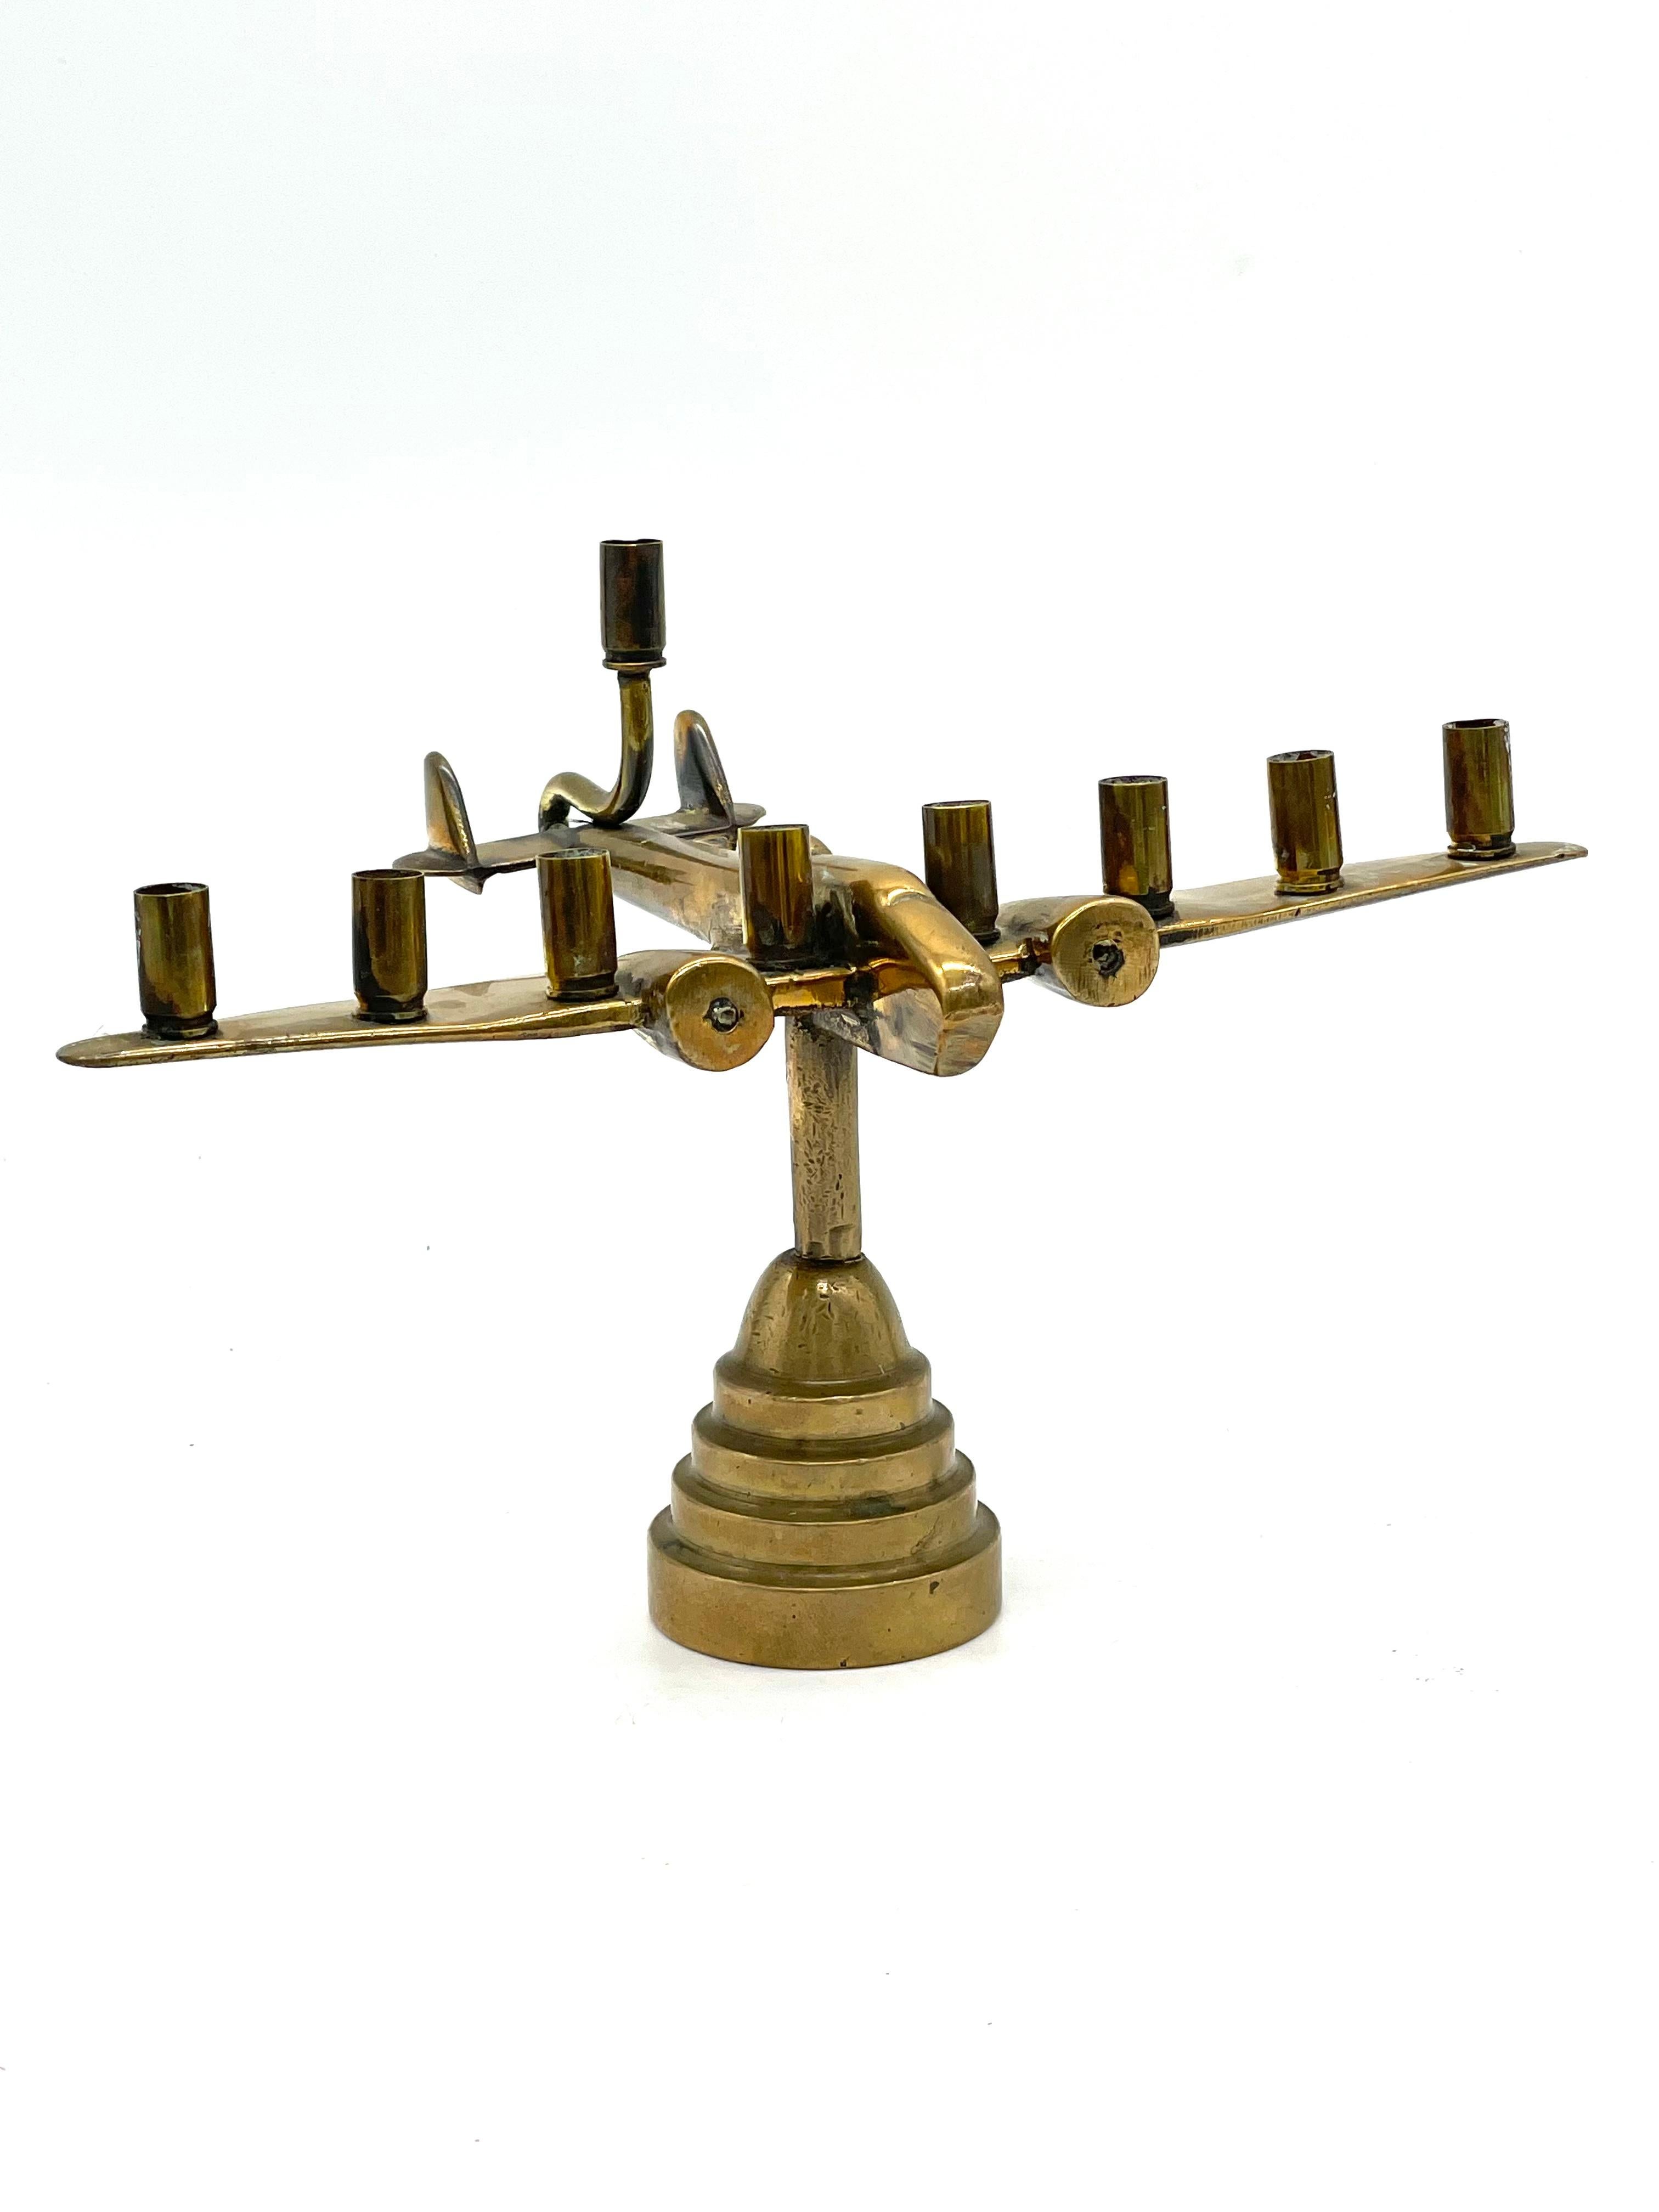 A brass Hanukkah lamp made by Israeli Defense soldiers features nine bullet and shell cartridges in the form of candleholders. The bullet cartridges are screwed into shell cartridges that are supported by a horizontal surface mimicking the shape of